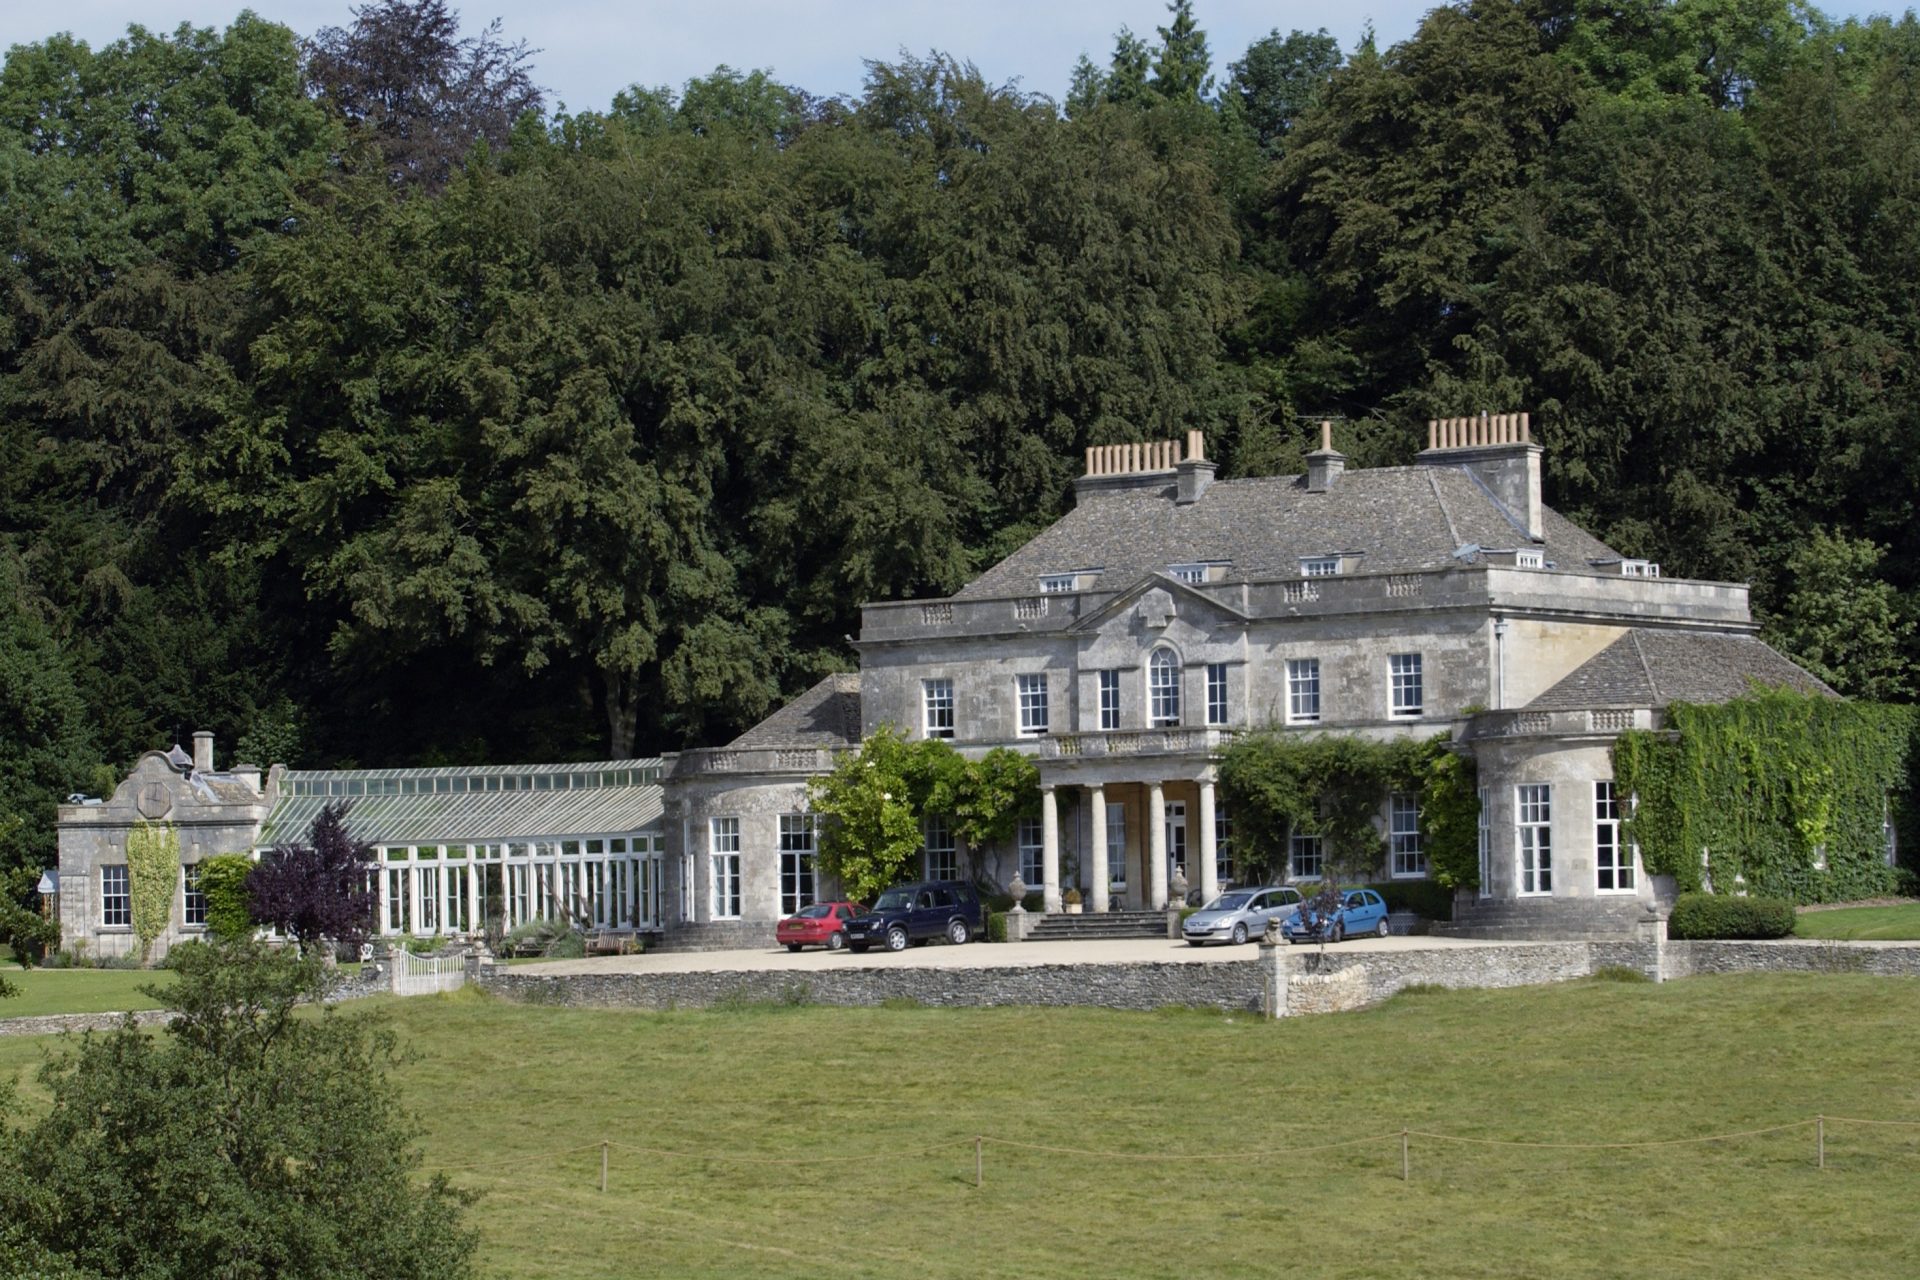 Her home: Gatcombe Park Residence